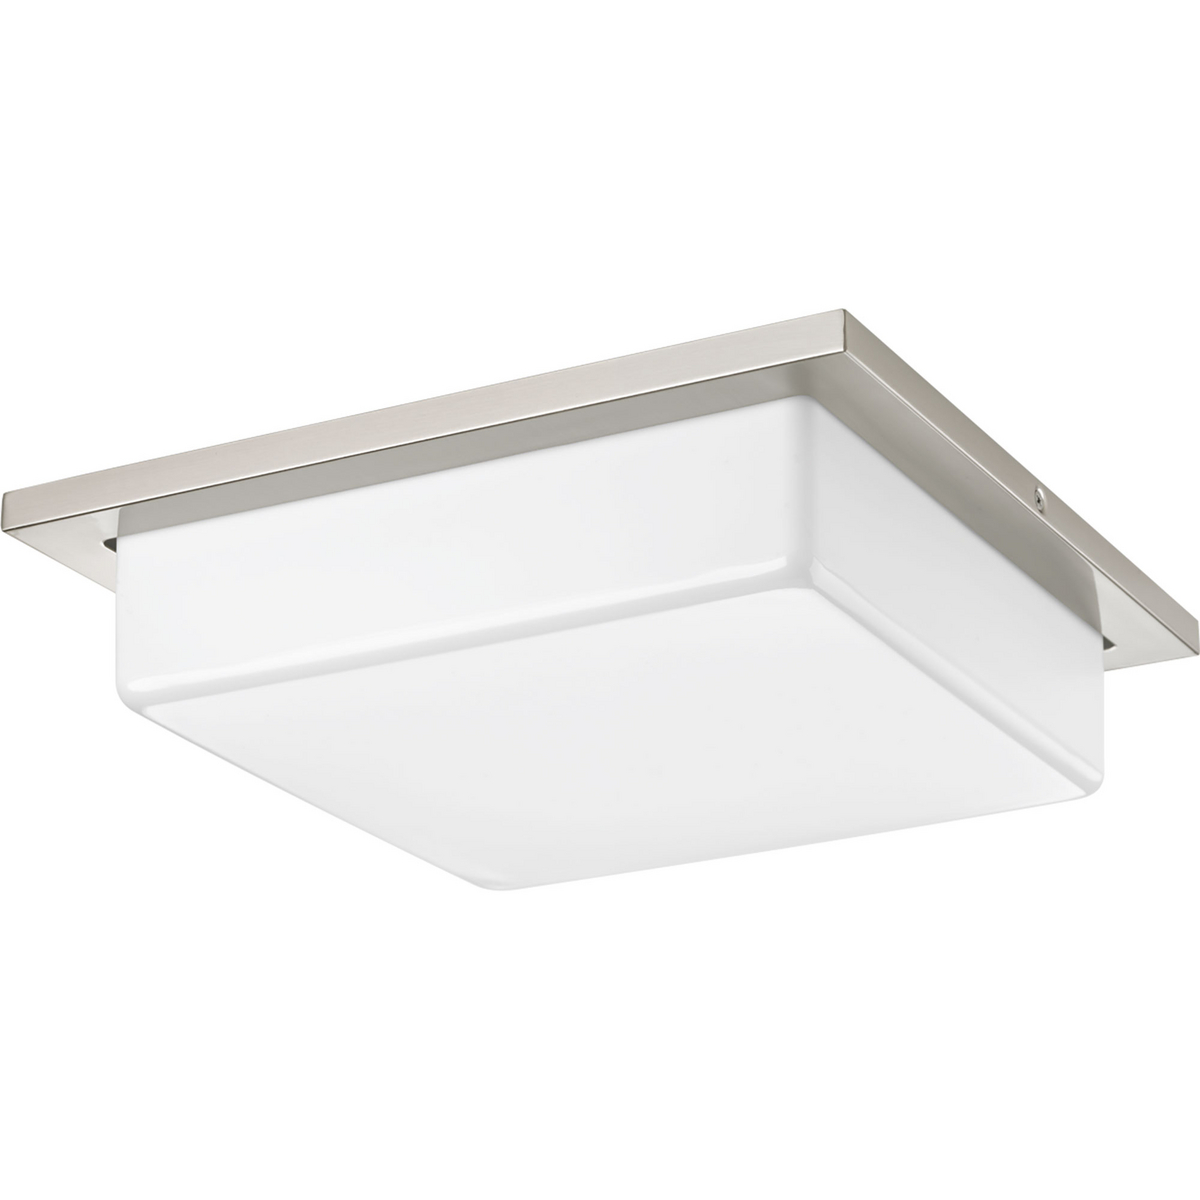 Transit is a uniquely styled series with clean design flexibility. This two-light LED close to ceiling featuring a white acrylic diffuser and Brushed Nickel finish can mount to either ceiling or wall.